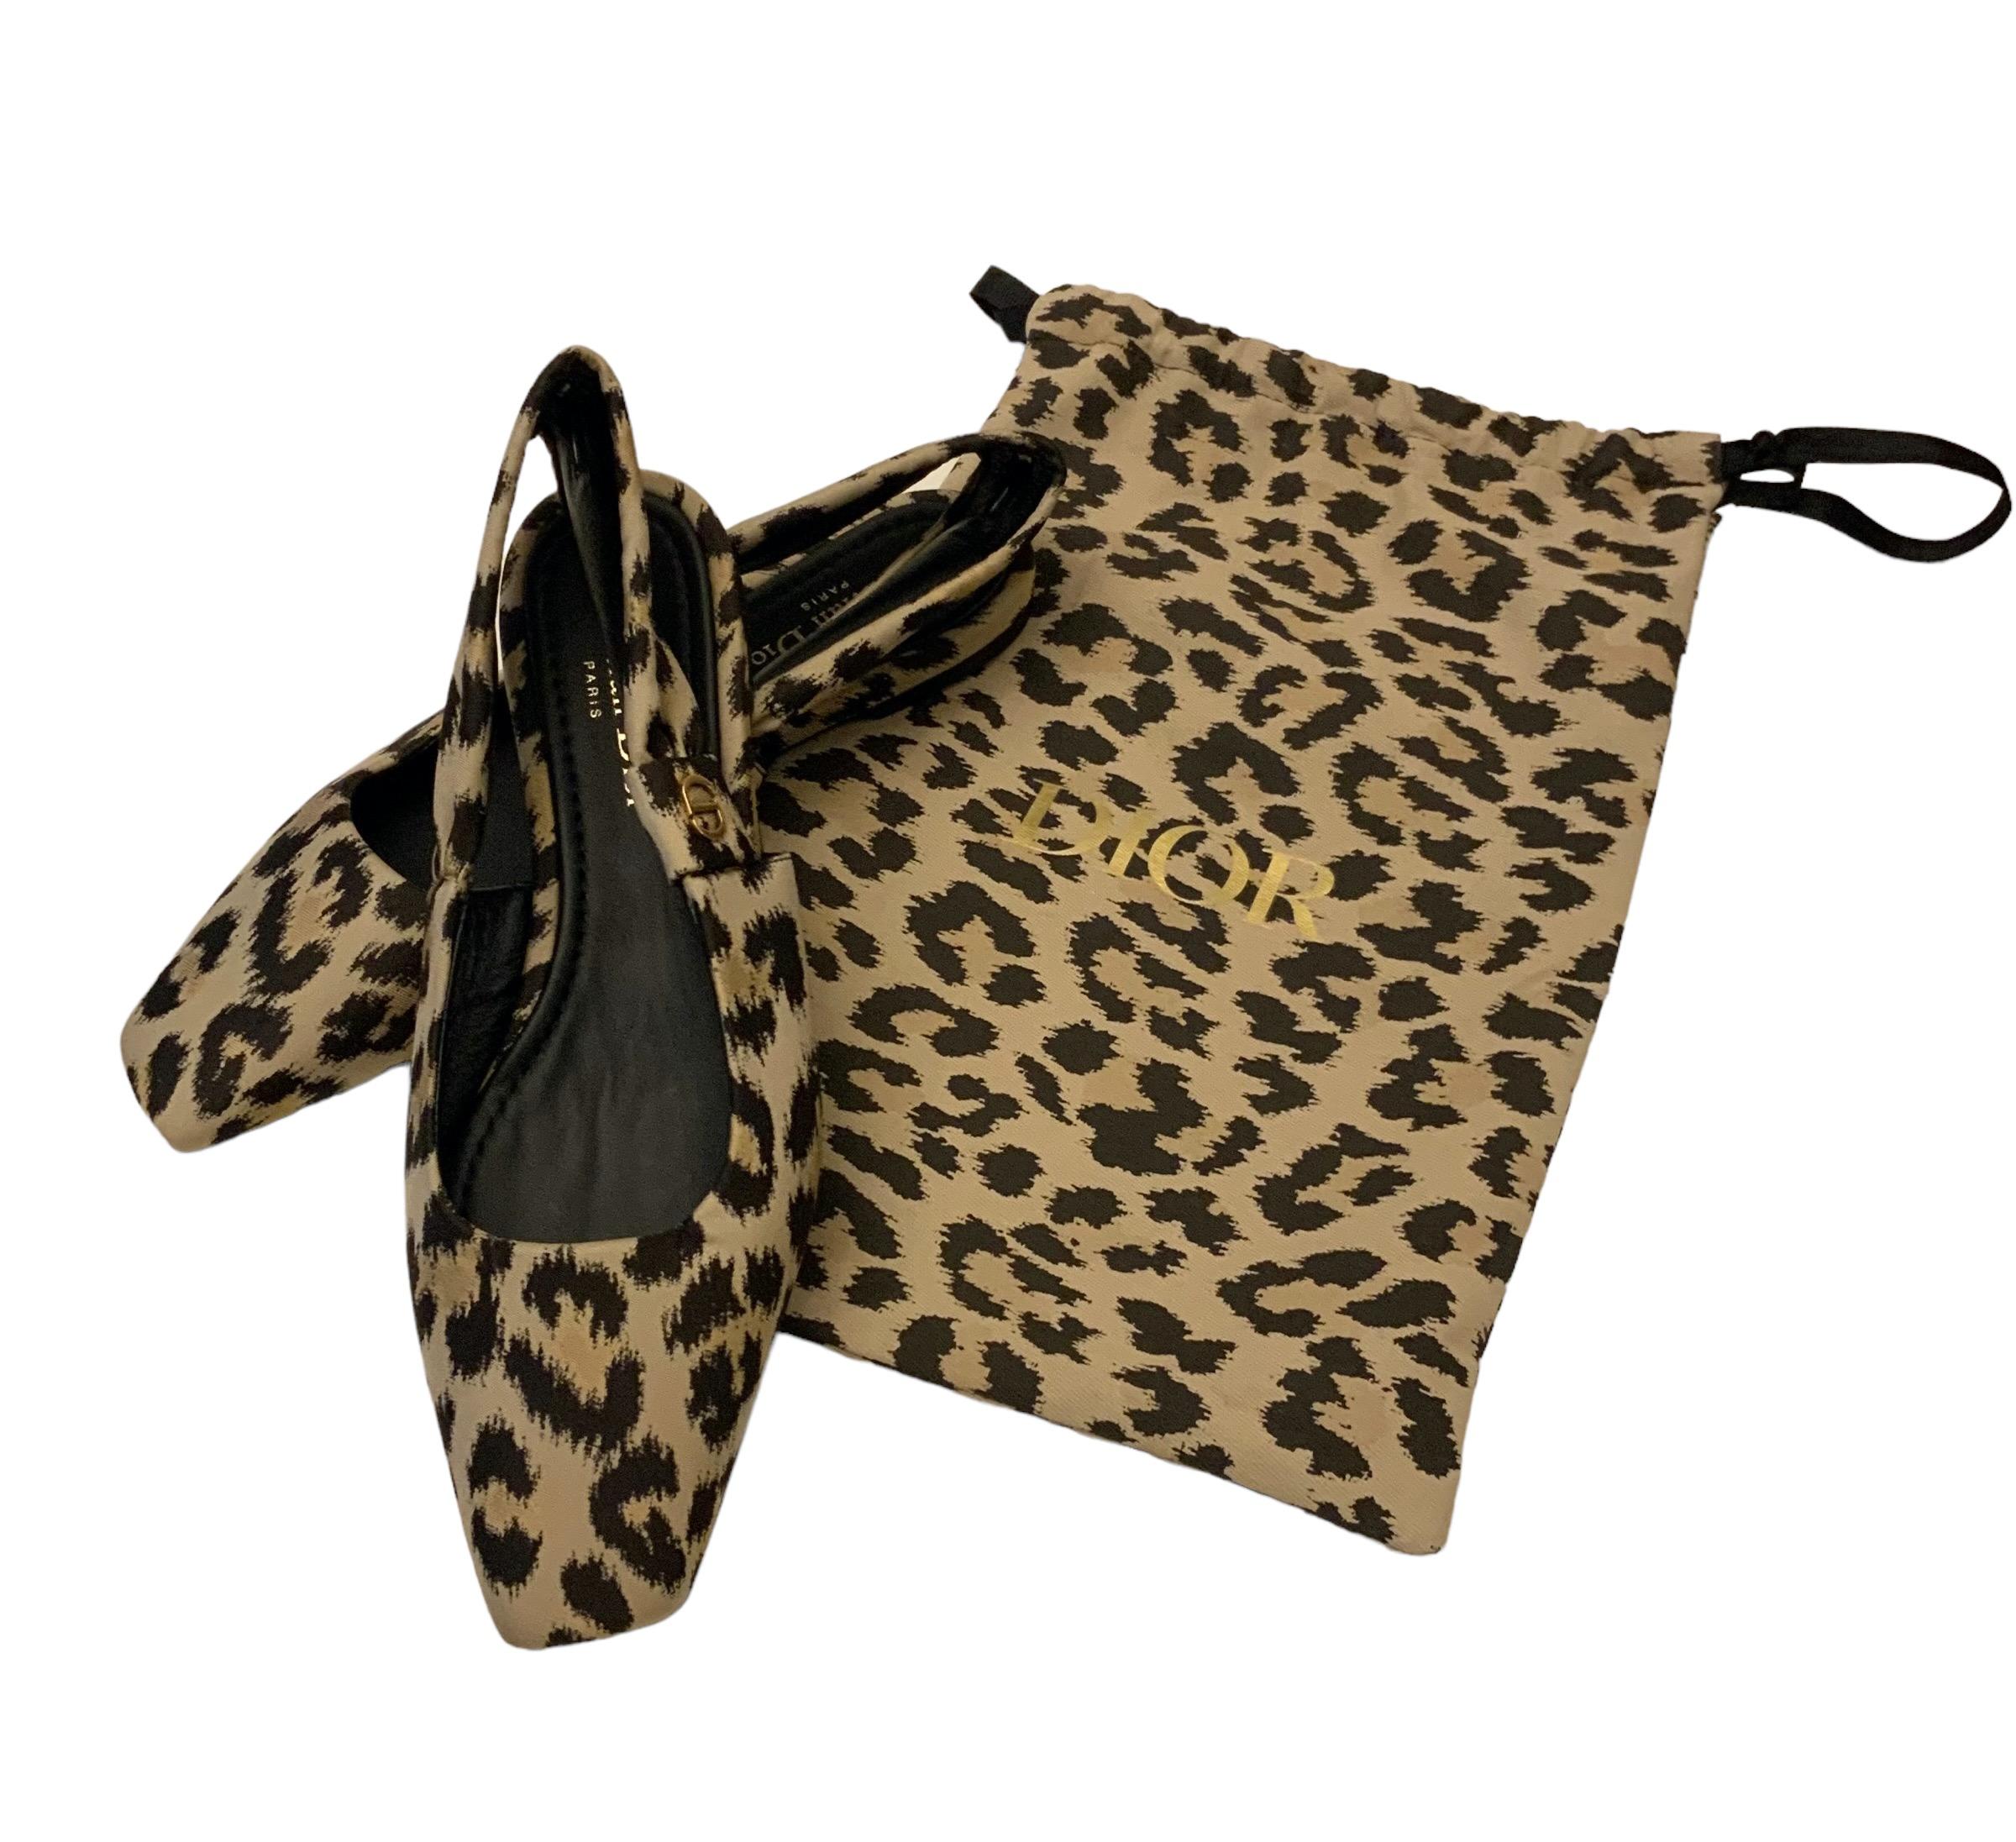 These New pre-owned Mizza Slingback flats from the house of Dior are crafted in a leopard printed nylon.
They feature a back strap and a smal gold-tone CD logo.
The insole is slightly padded and the sole is made of rubber for a comfortable flat